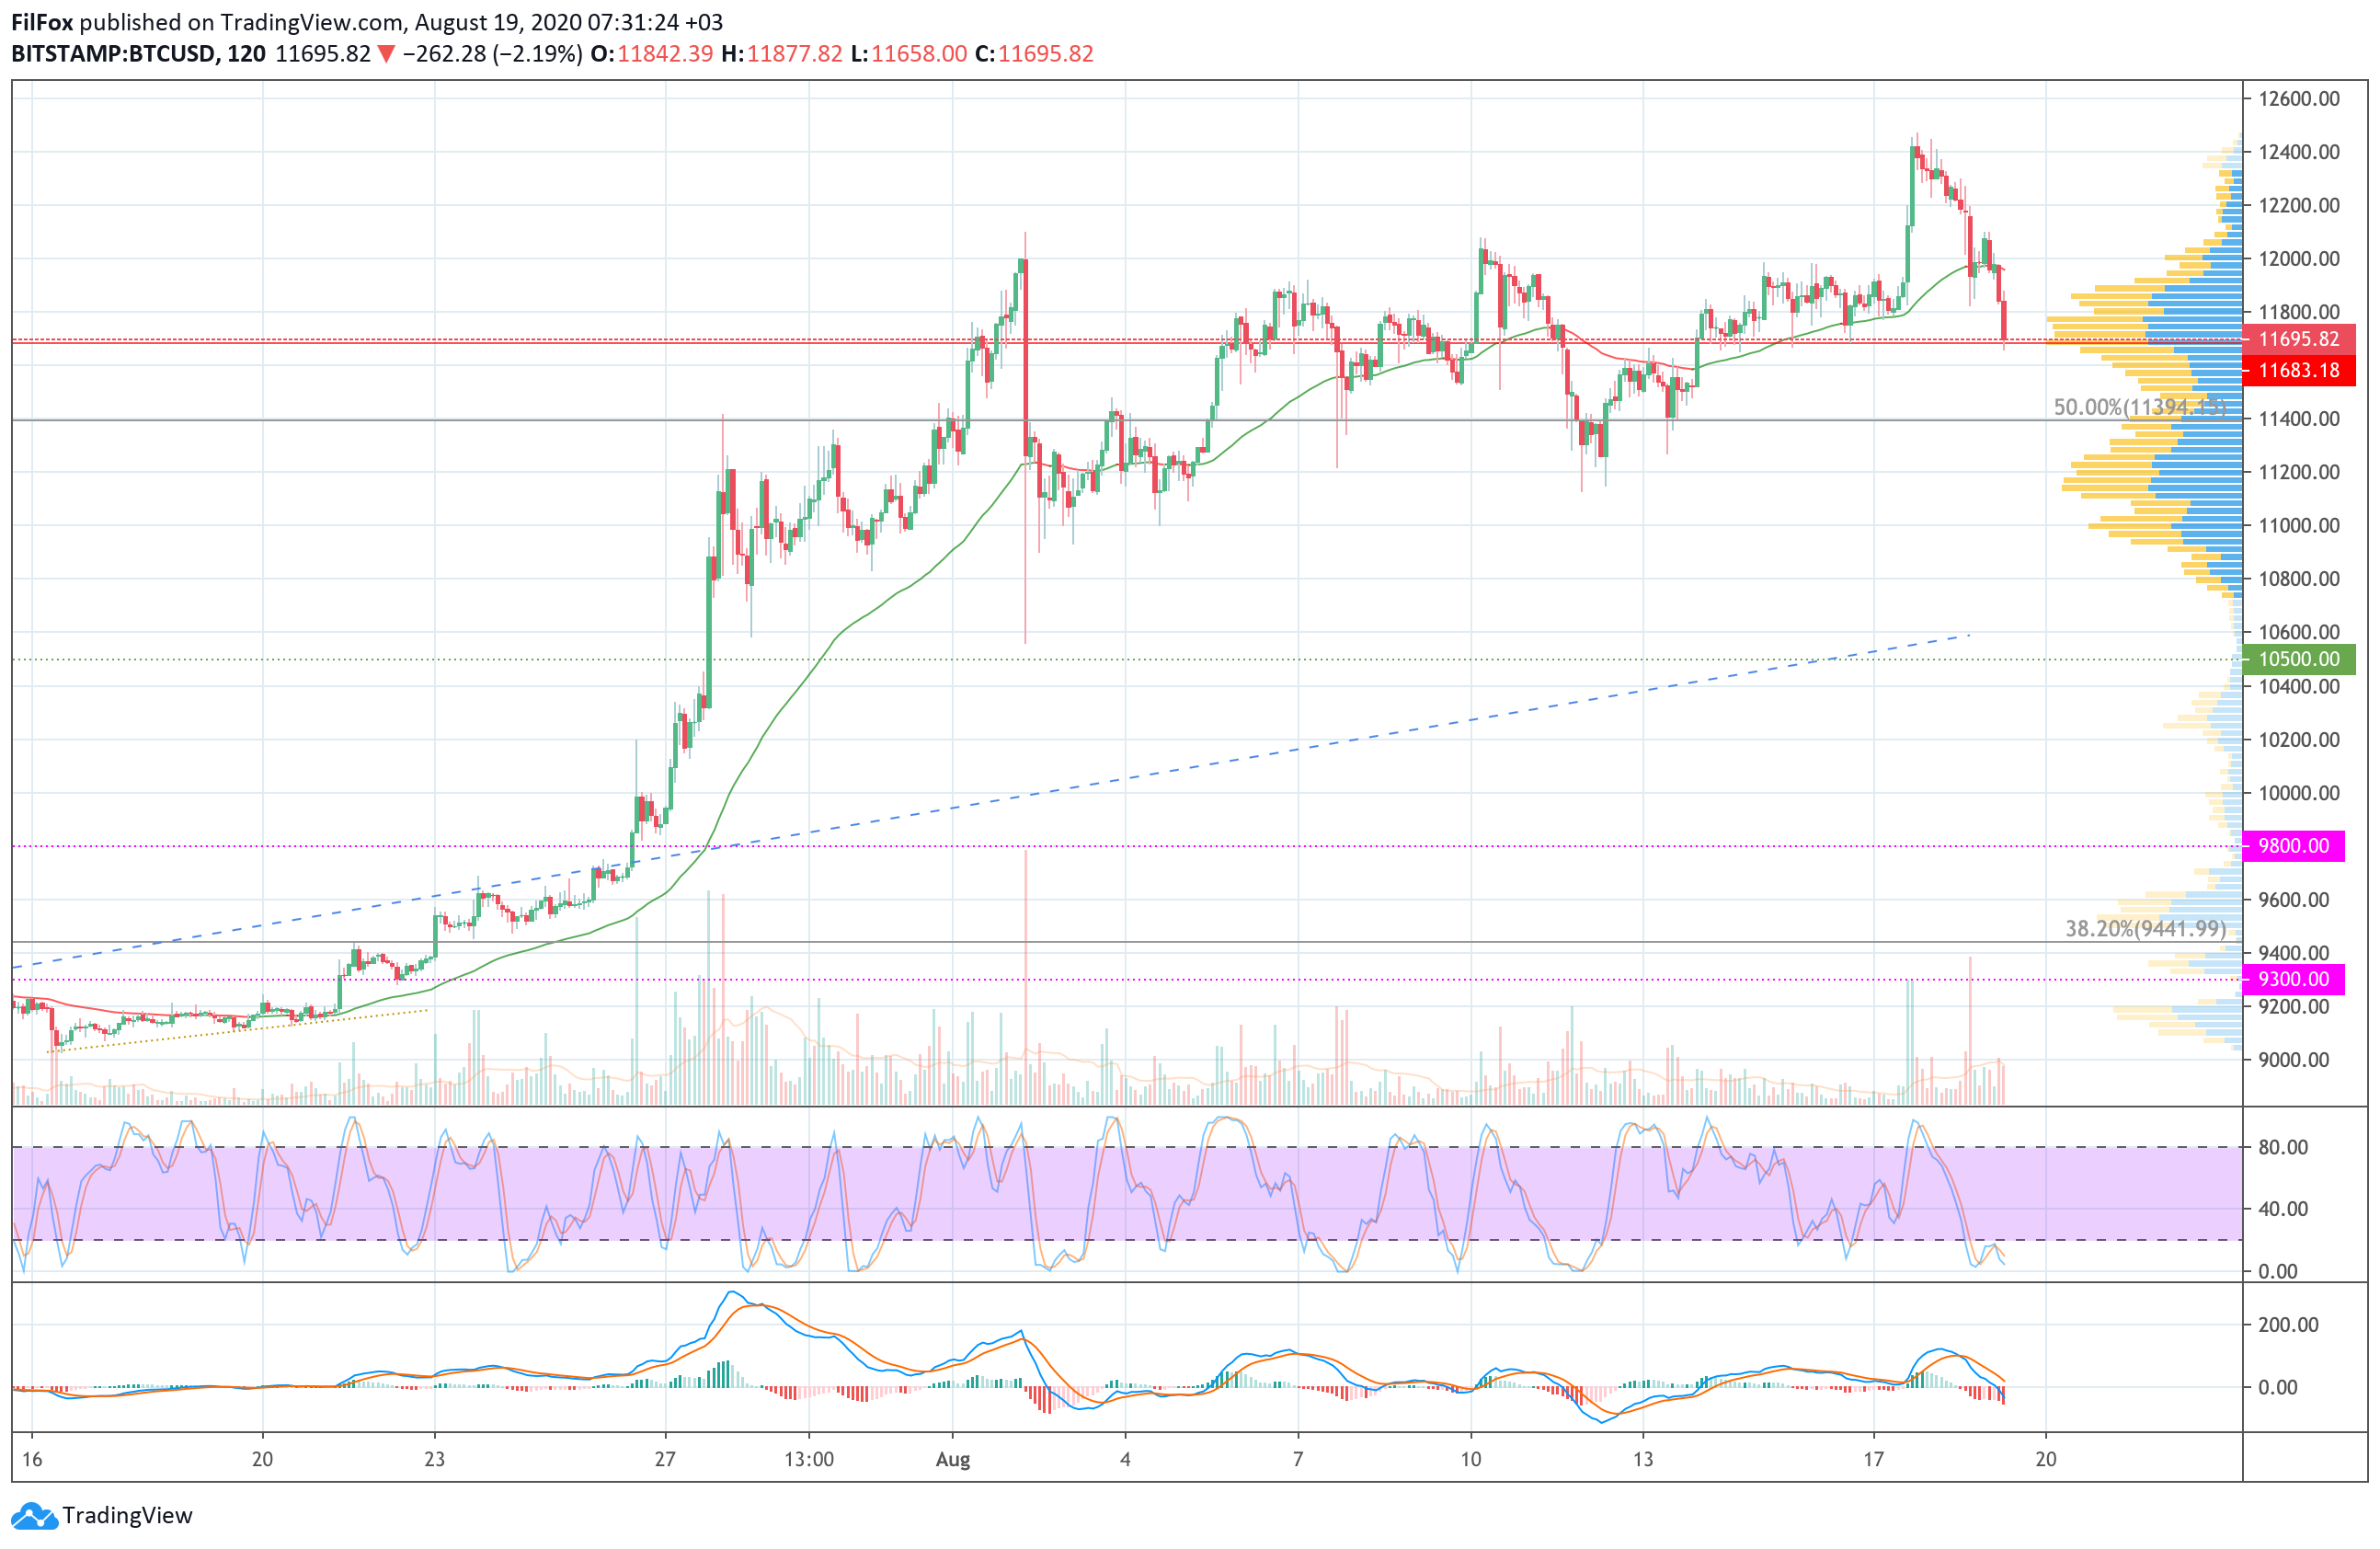 Analysis of prices for Bitcoin, Ethereum, XRP for 08/19/2020